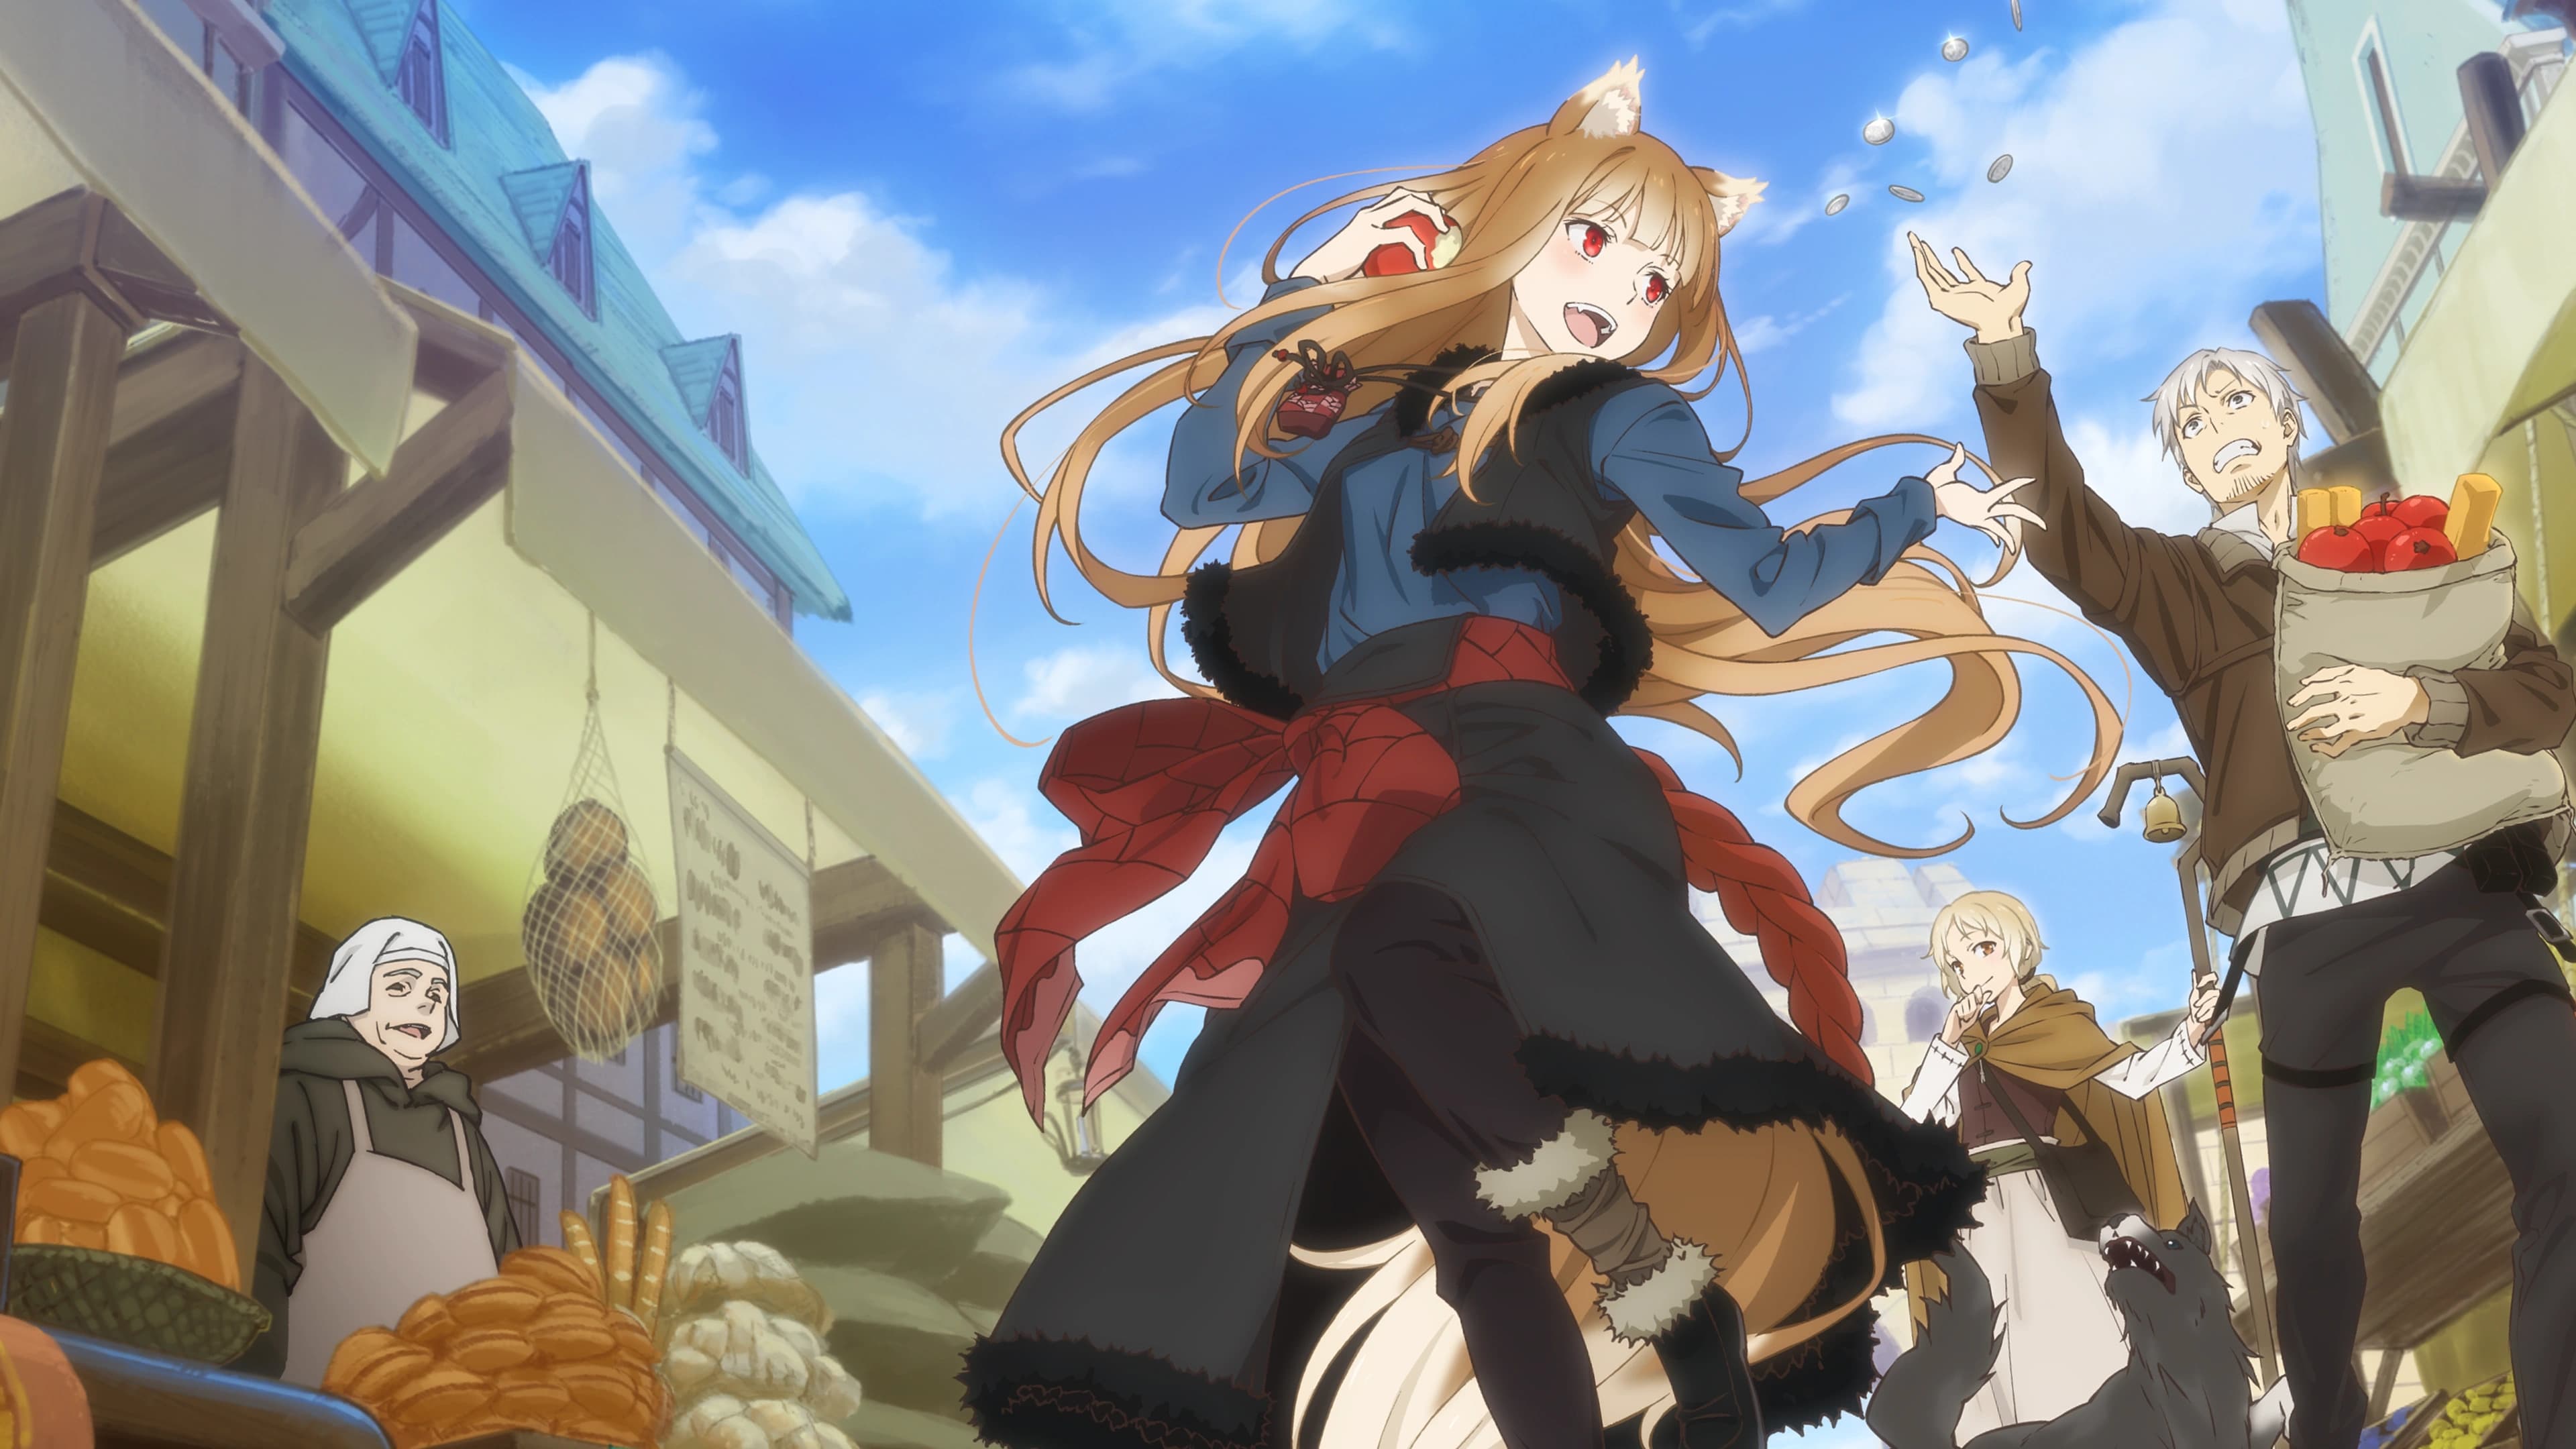 Spice and Wolf: MERCHANT MEETS THE WISE WOLF - Season 1 Episode 1